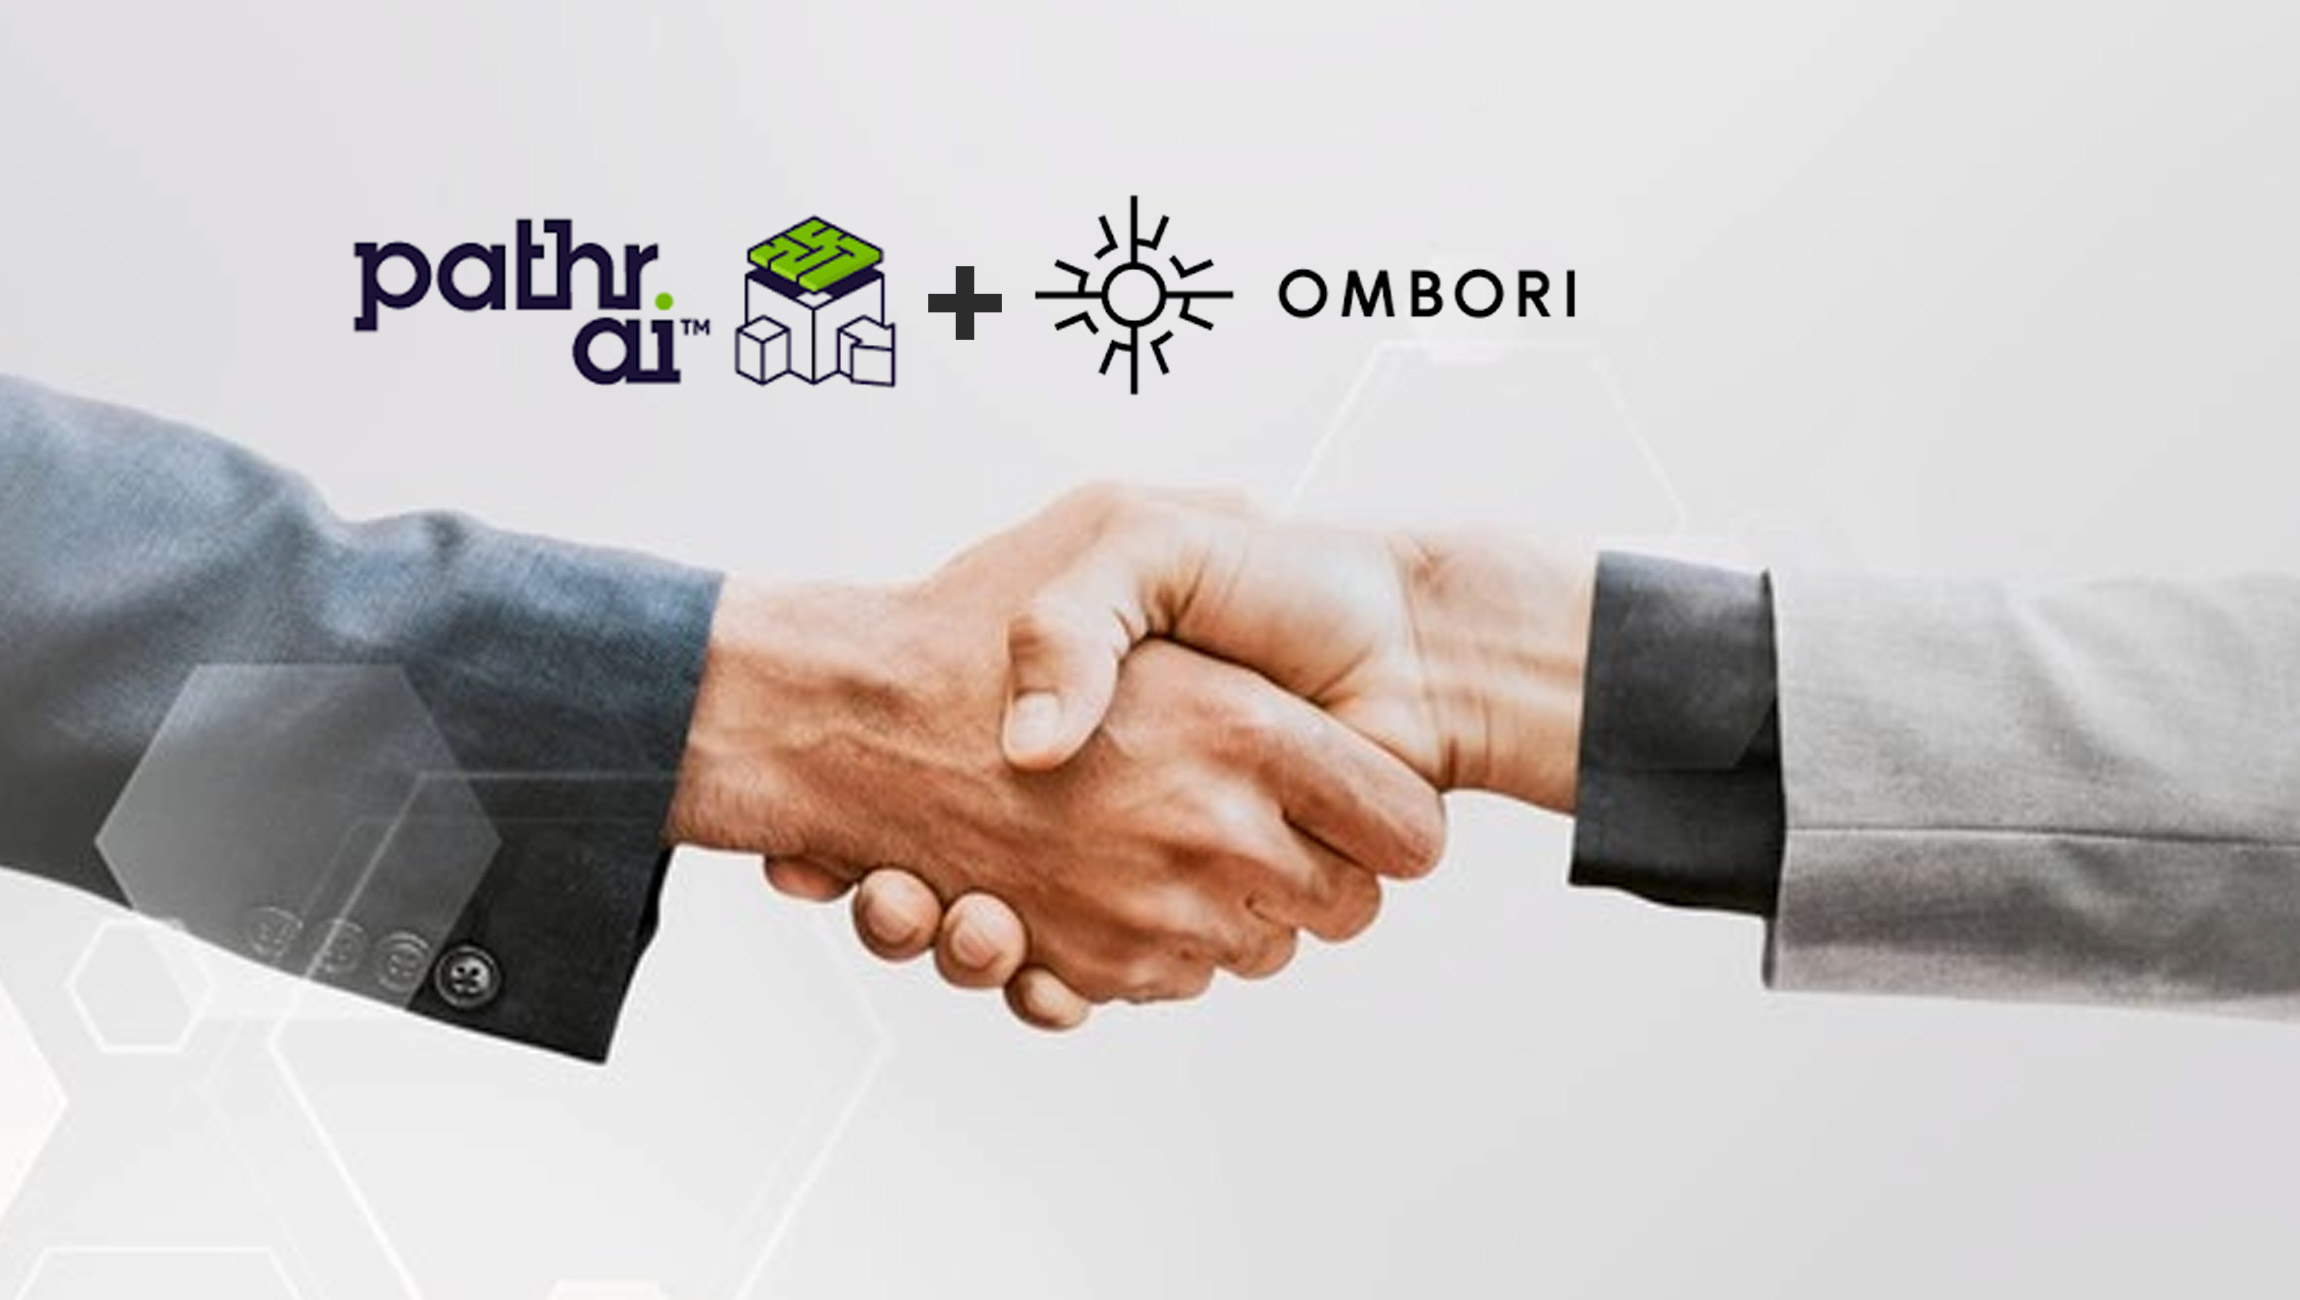 Pathr.ai-Announces-Strategic-Partnership-with-Ombori-to-Accelerate-Growth-for-Retailers